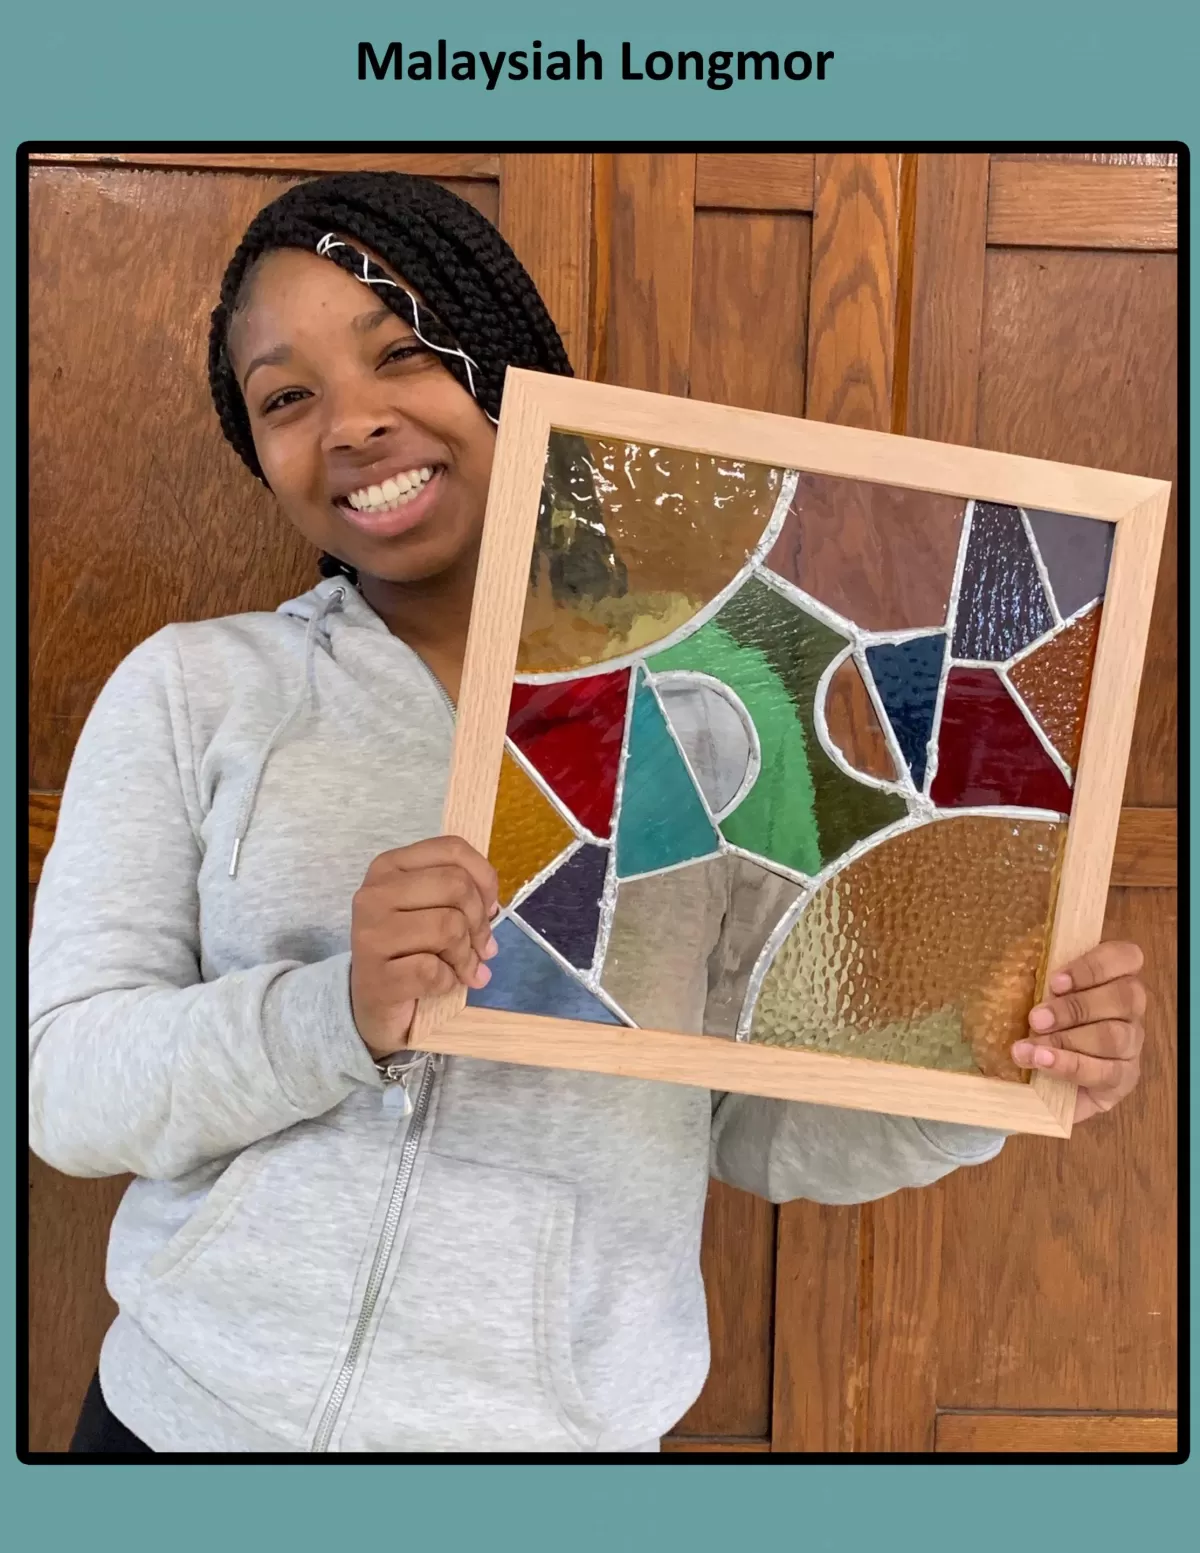 Malaysiah with her project - Photo Credit: The Stained Glass Project